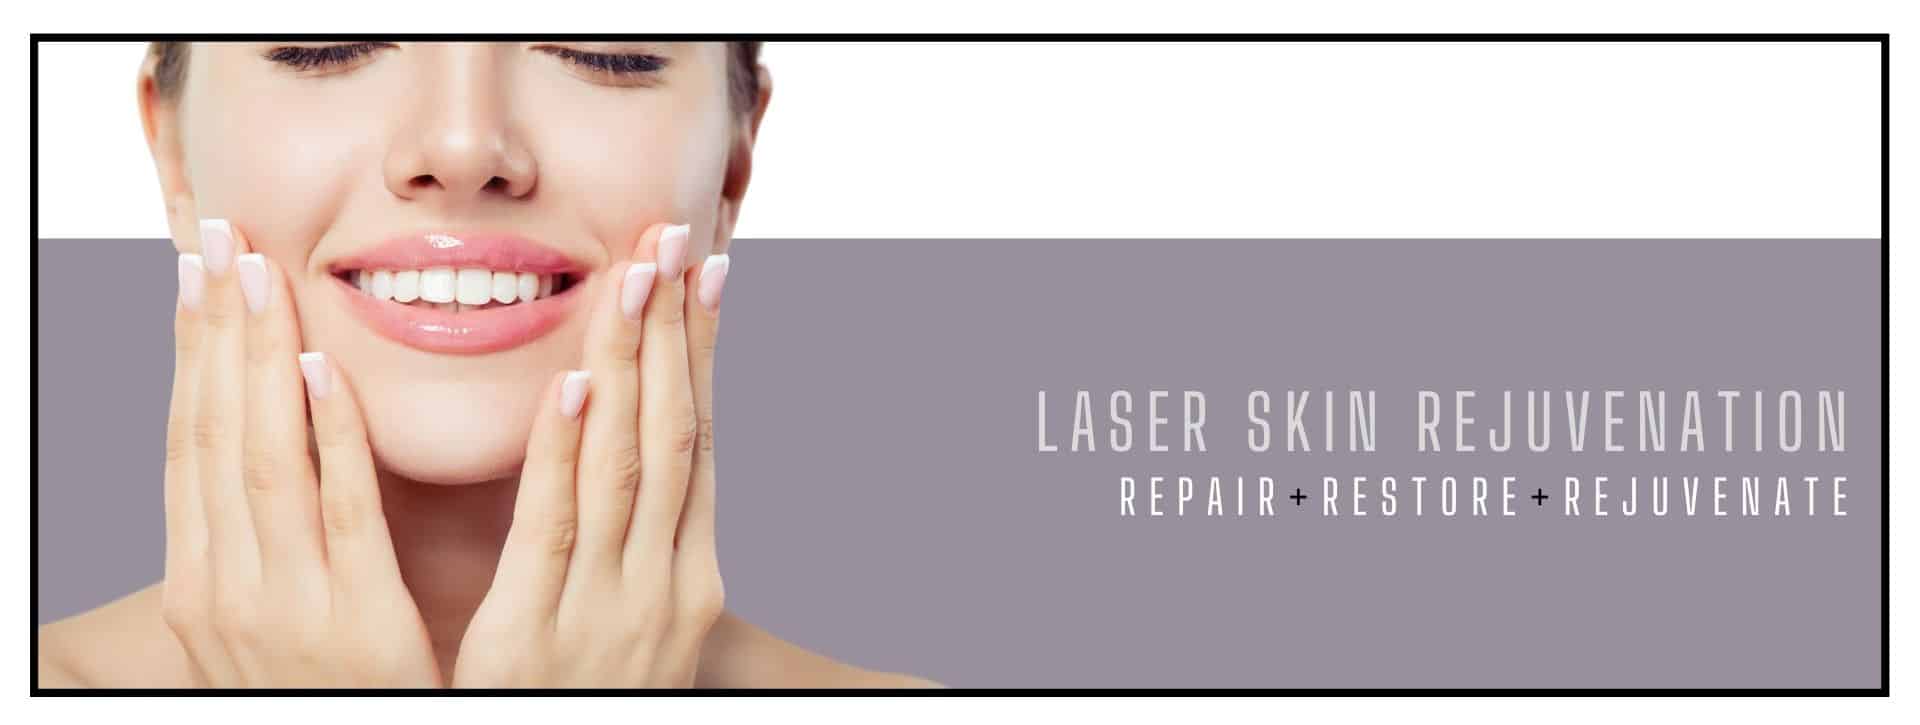 Woman touching her face and smiling after Laser Skin Rejuvanation.